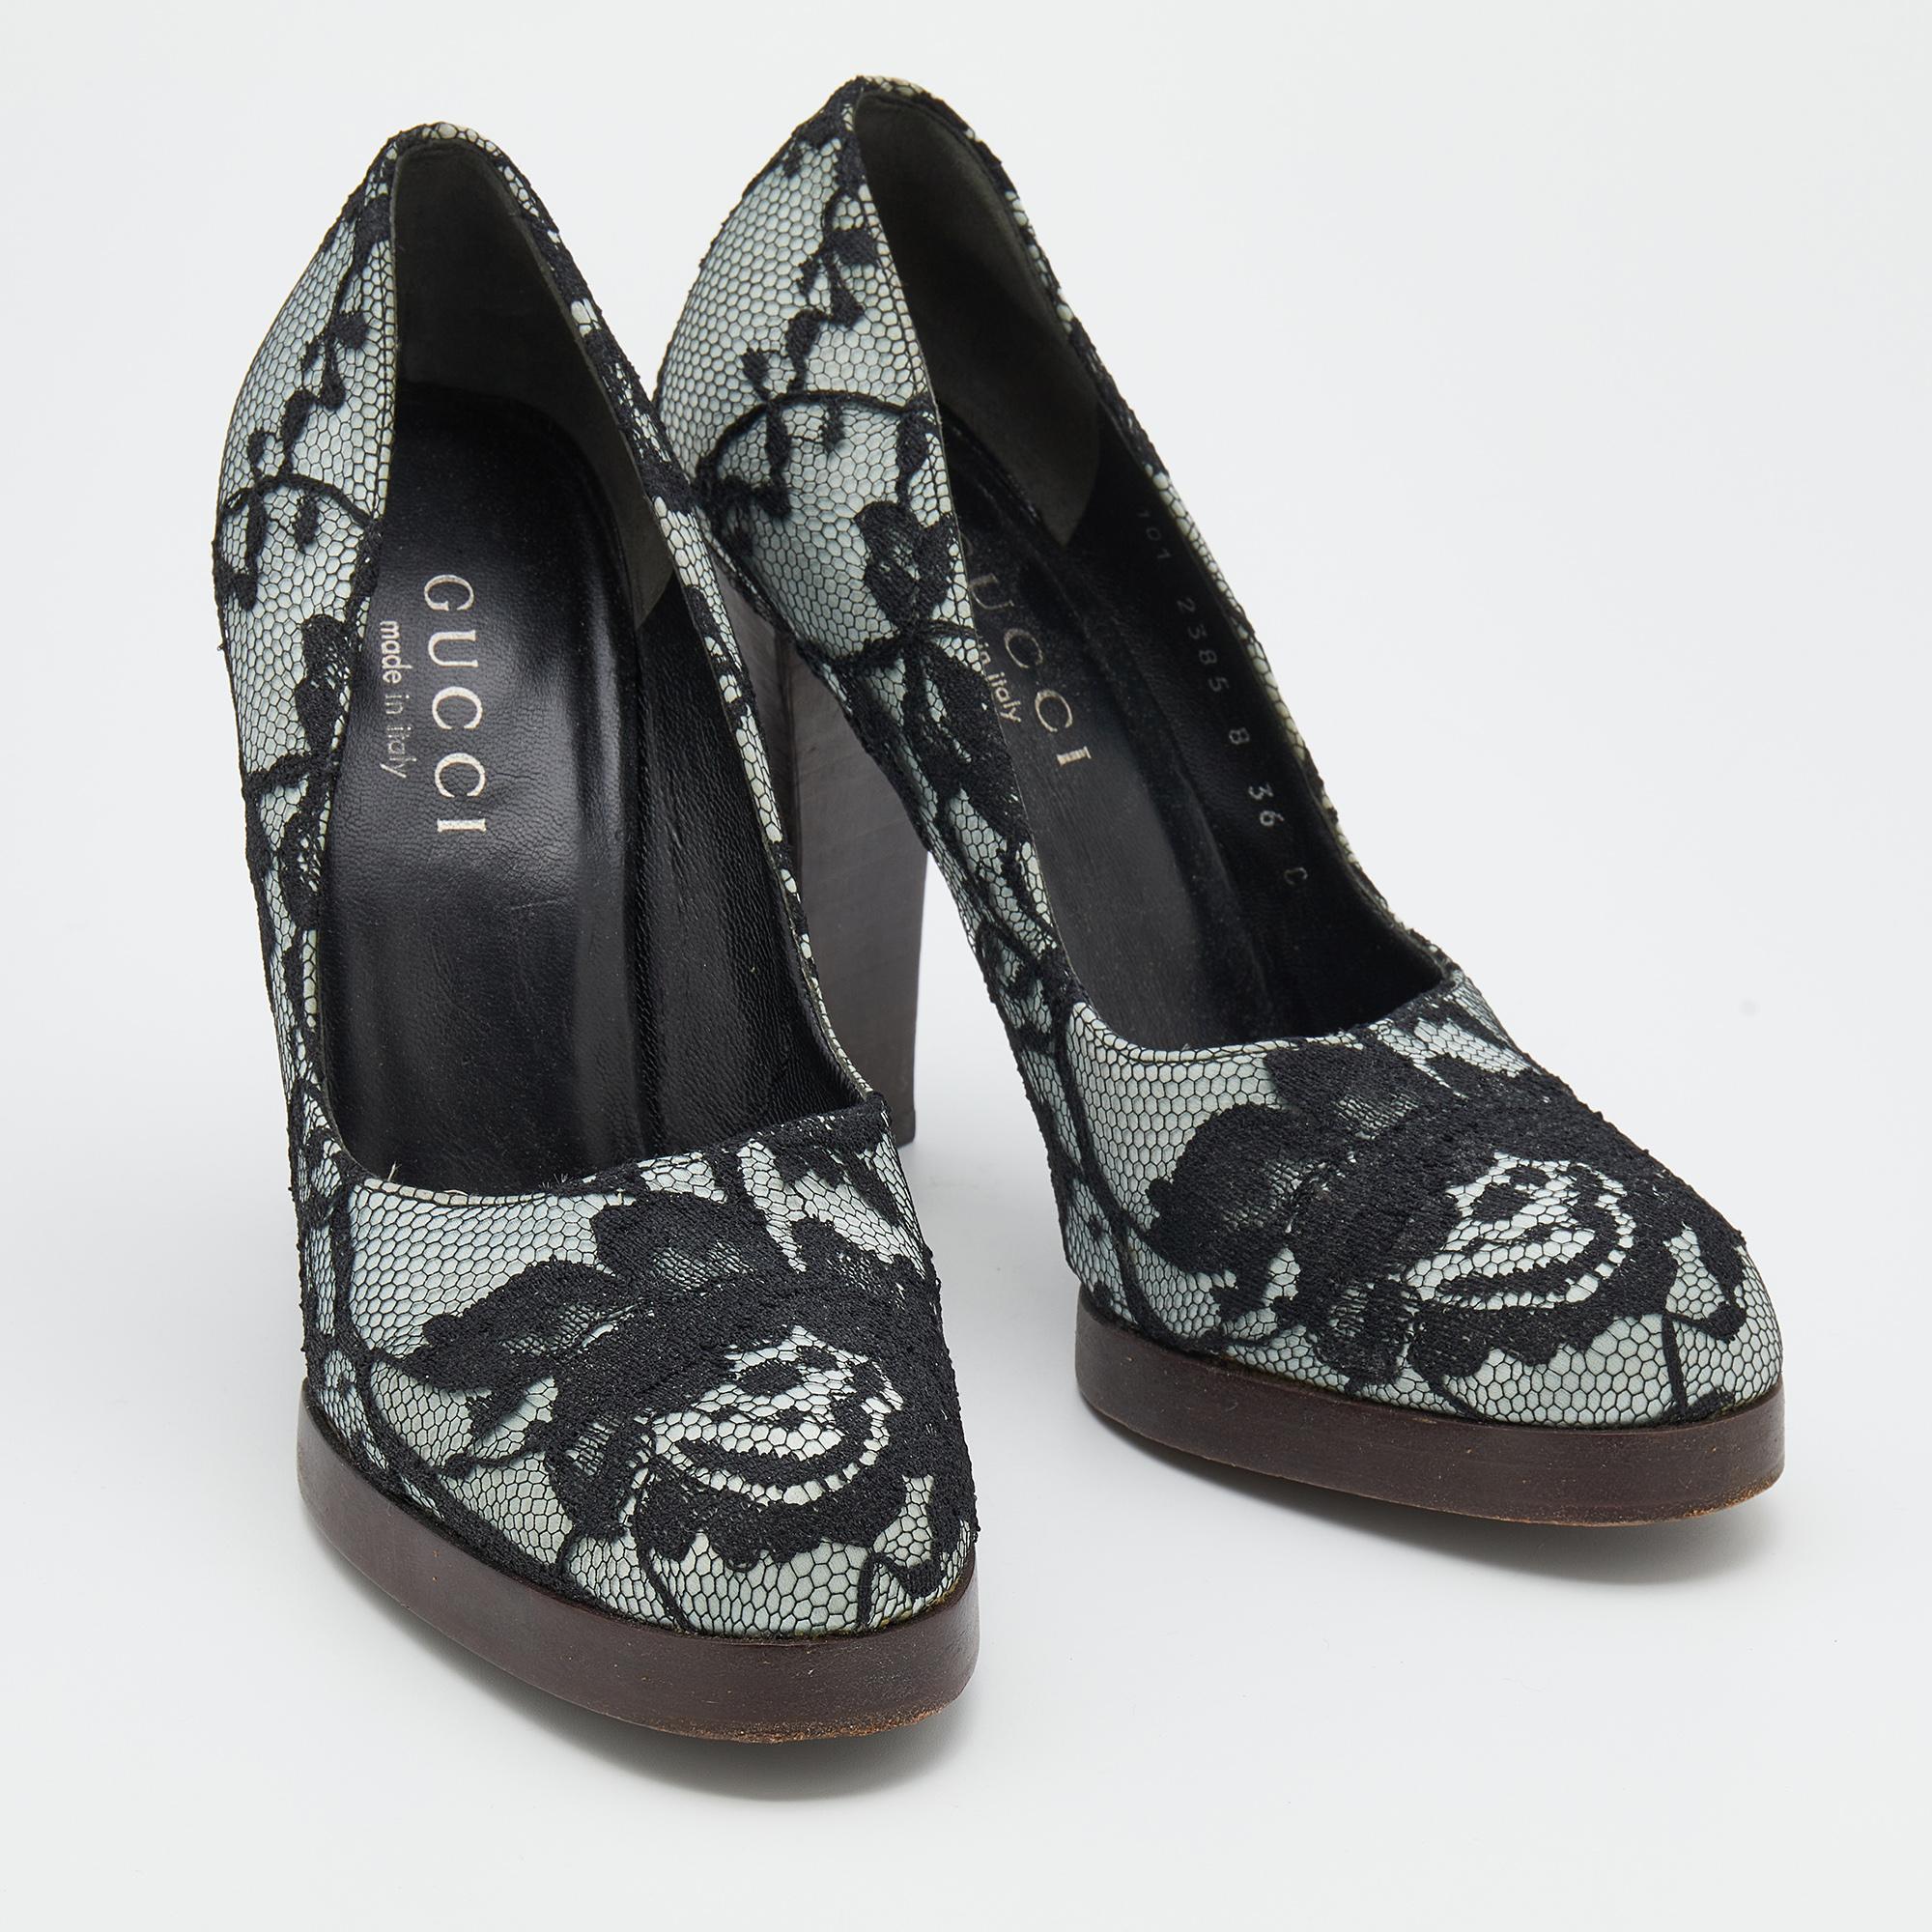 Women's Gucci Black/Grey Floral Lace And Satin Block Heel Pumps Size 36 For Sale